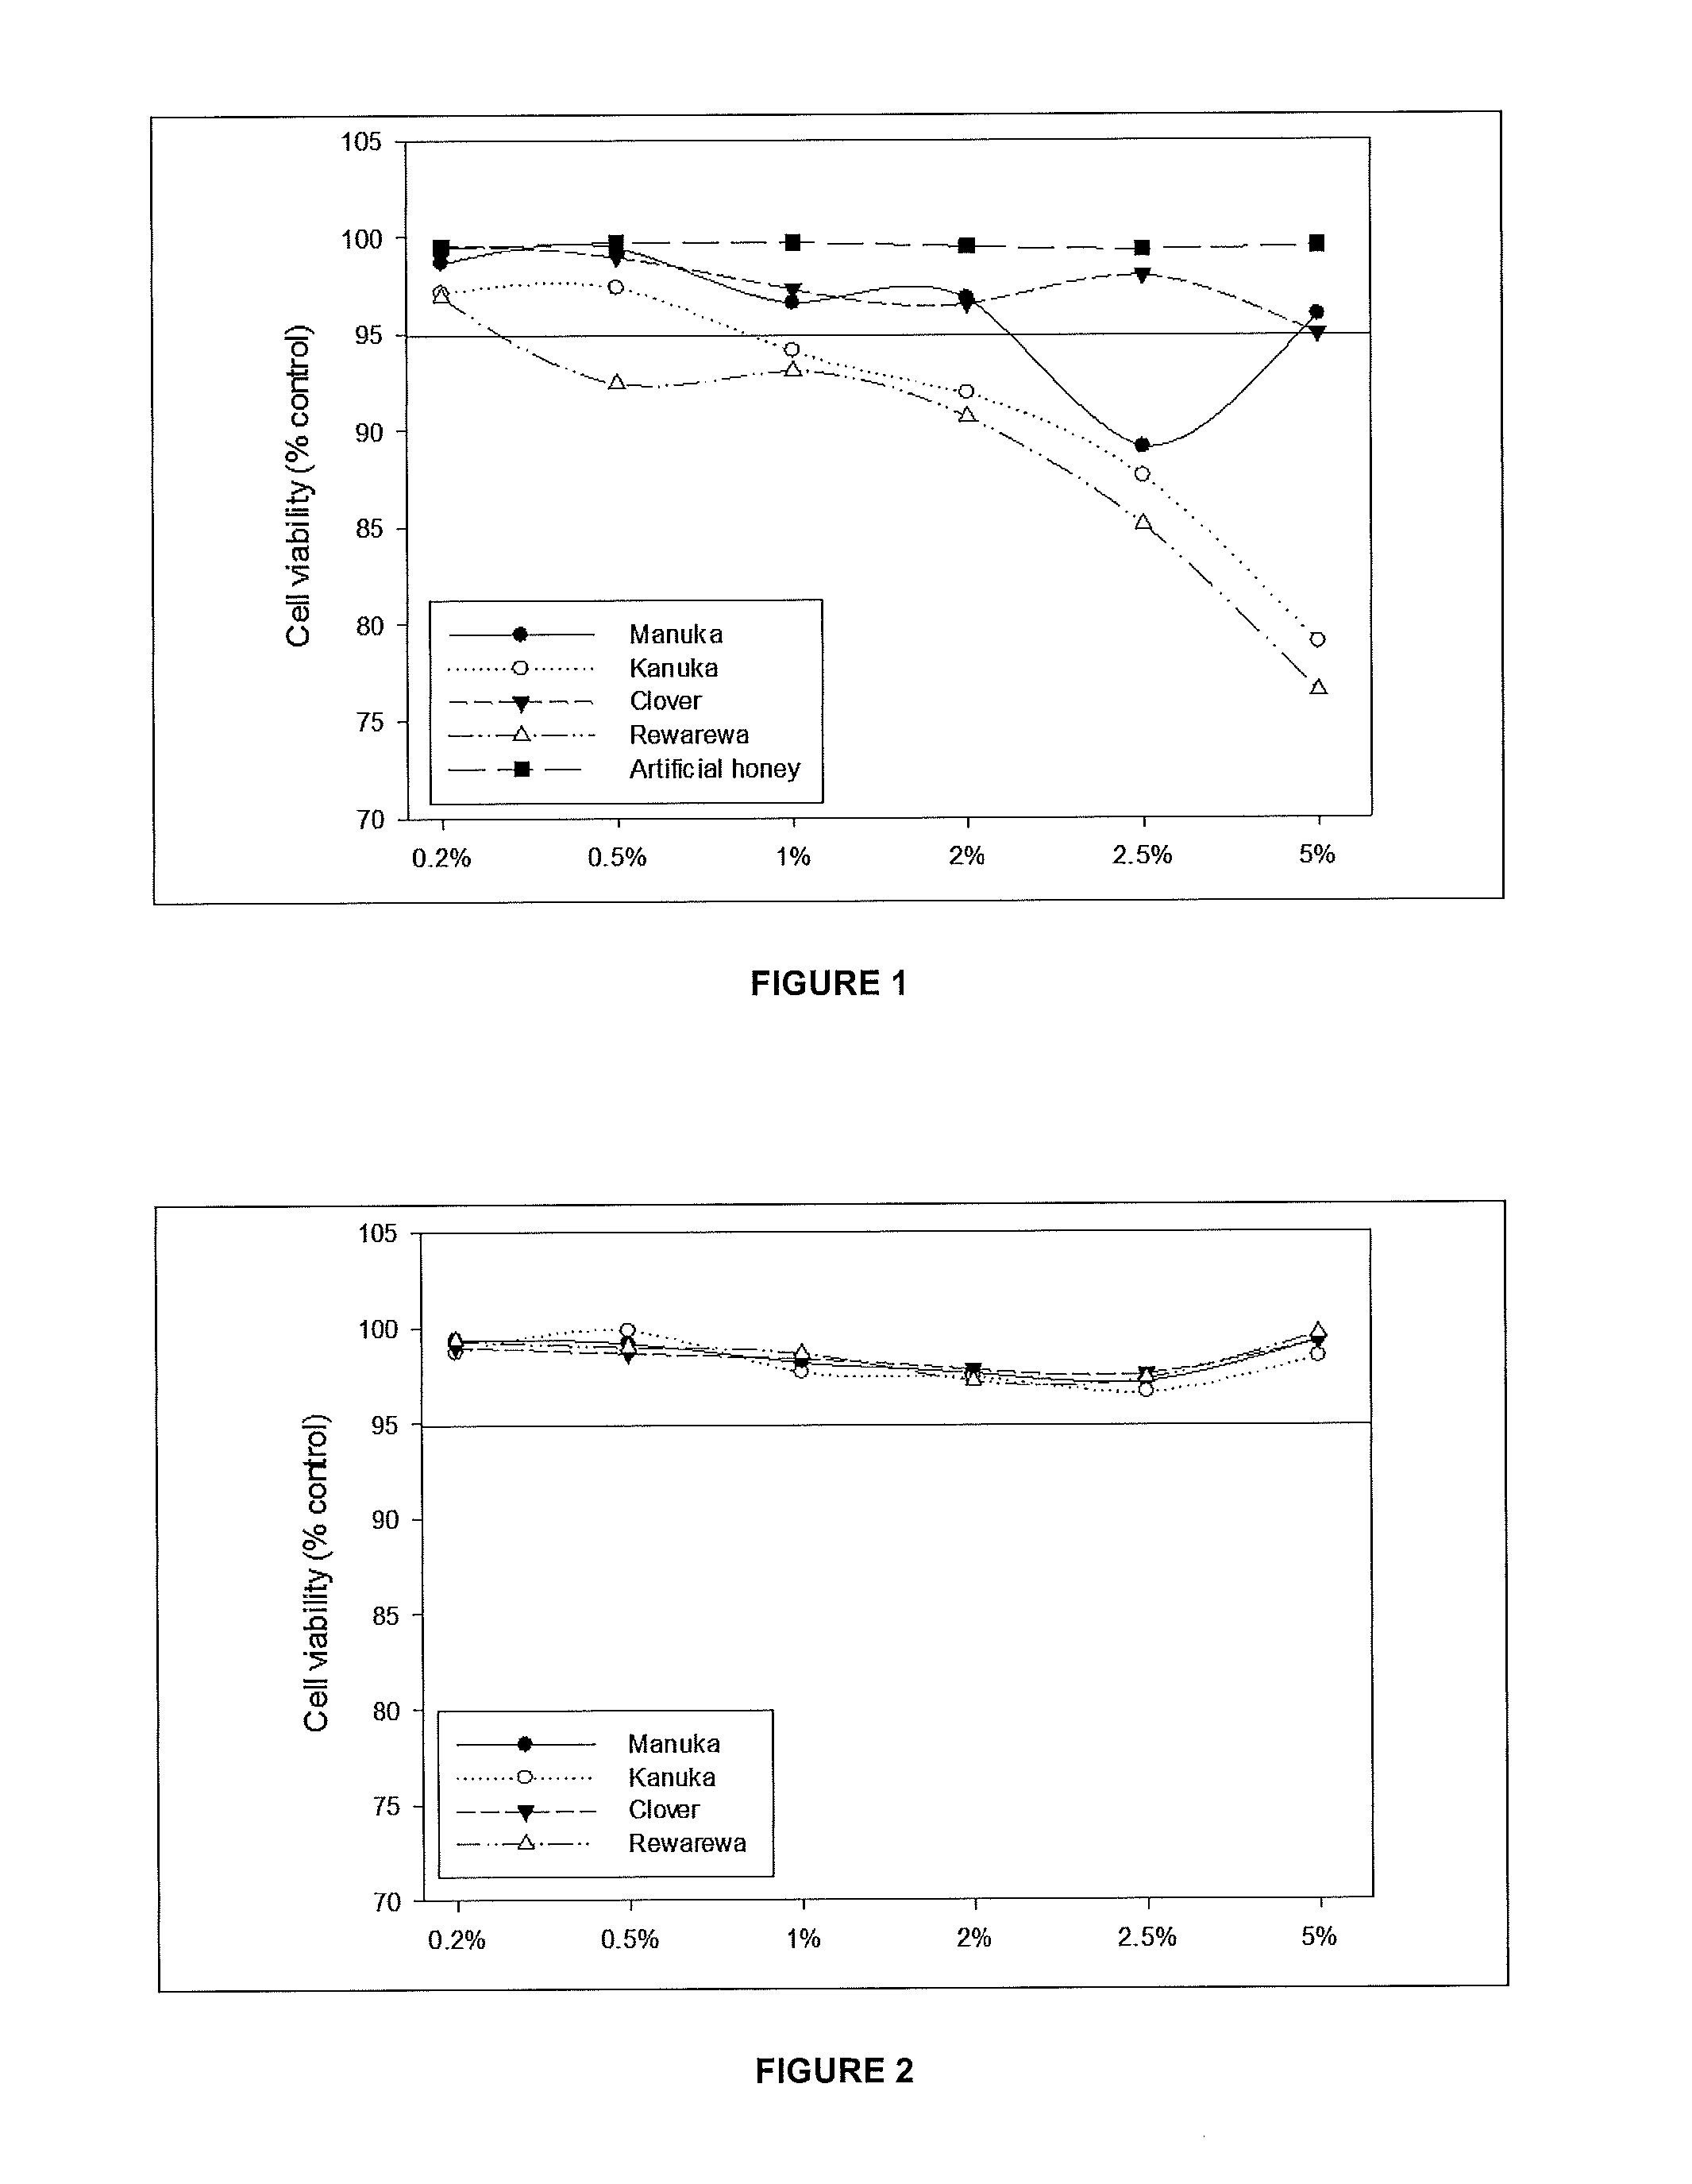 Anti-inflammatory compositions, methods and uses thereof